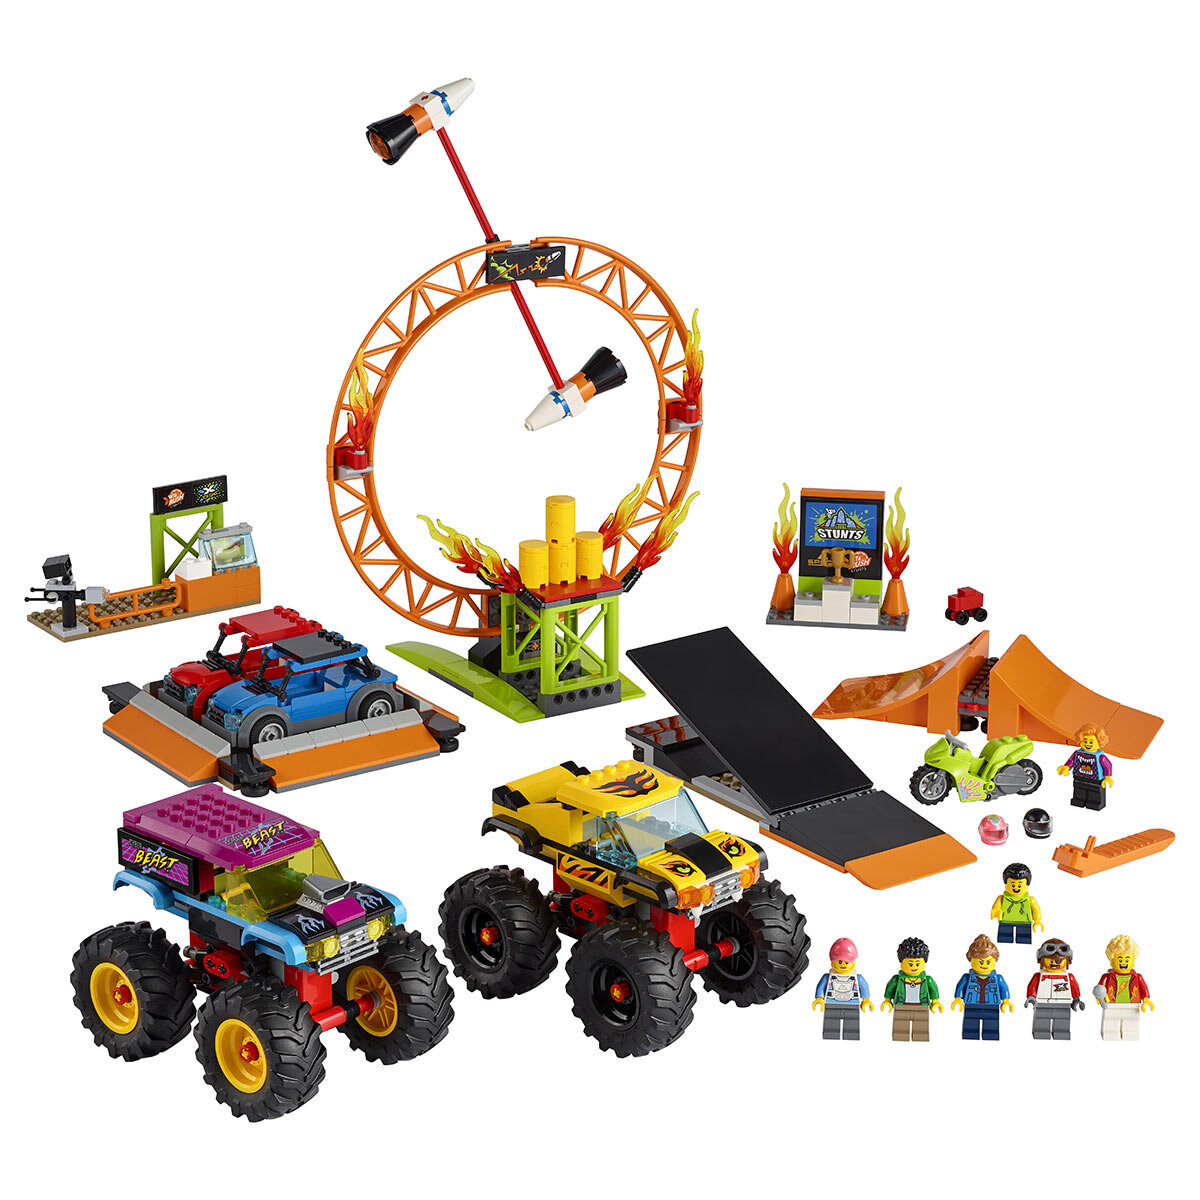 Buy LEGO City Stunt Show Arena Overview2 Image at Costco.co.uk